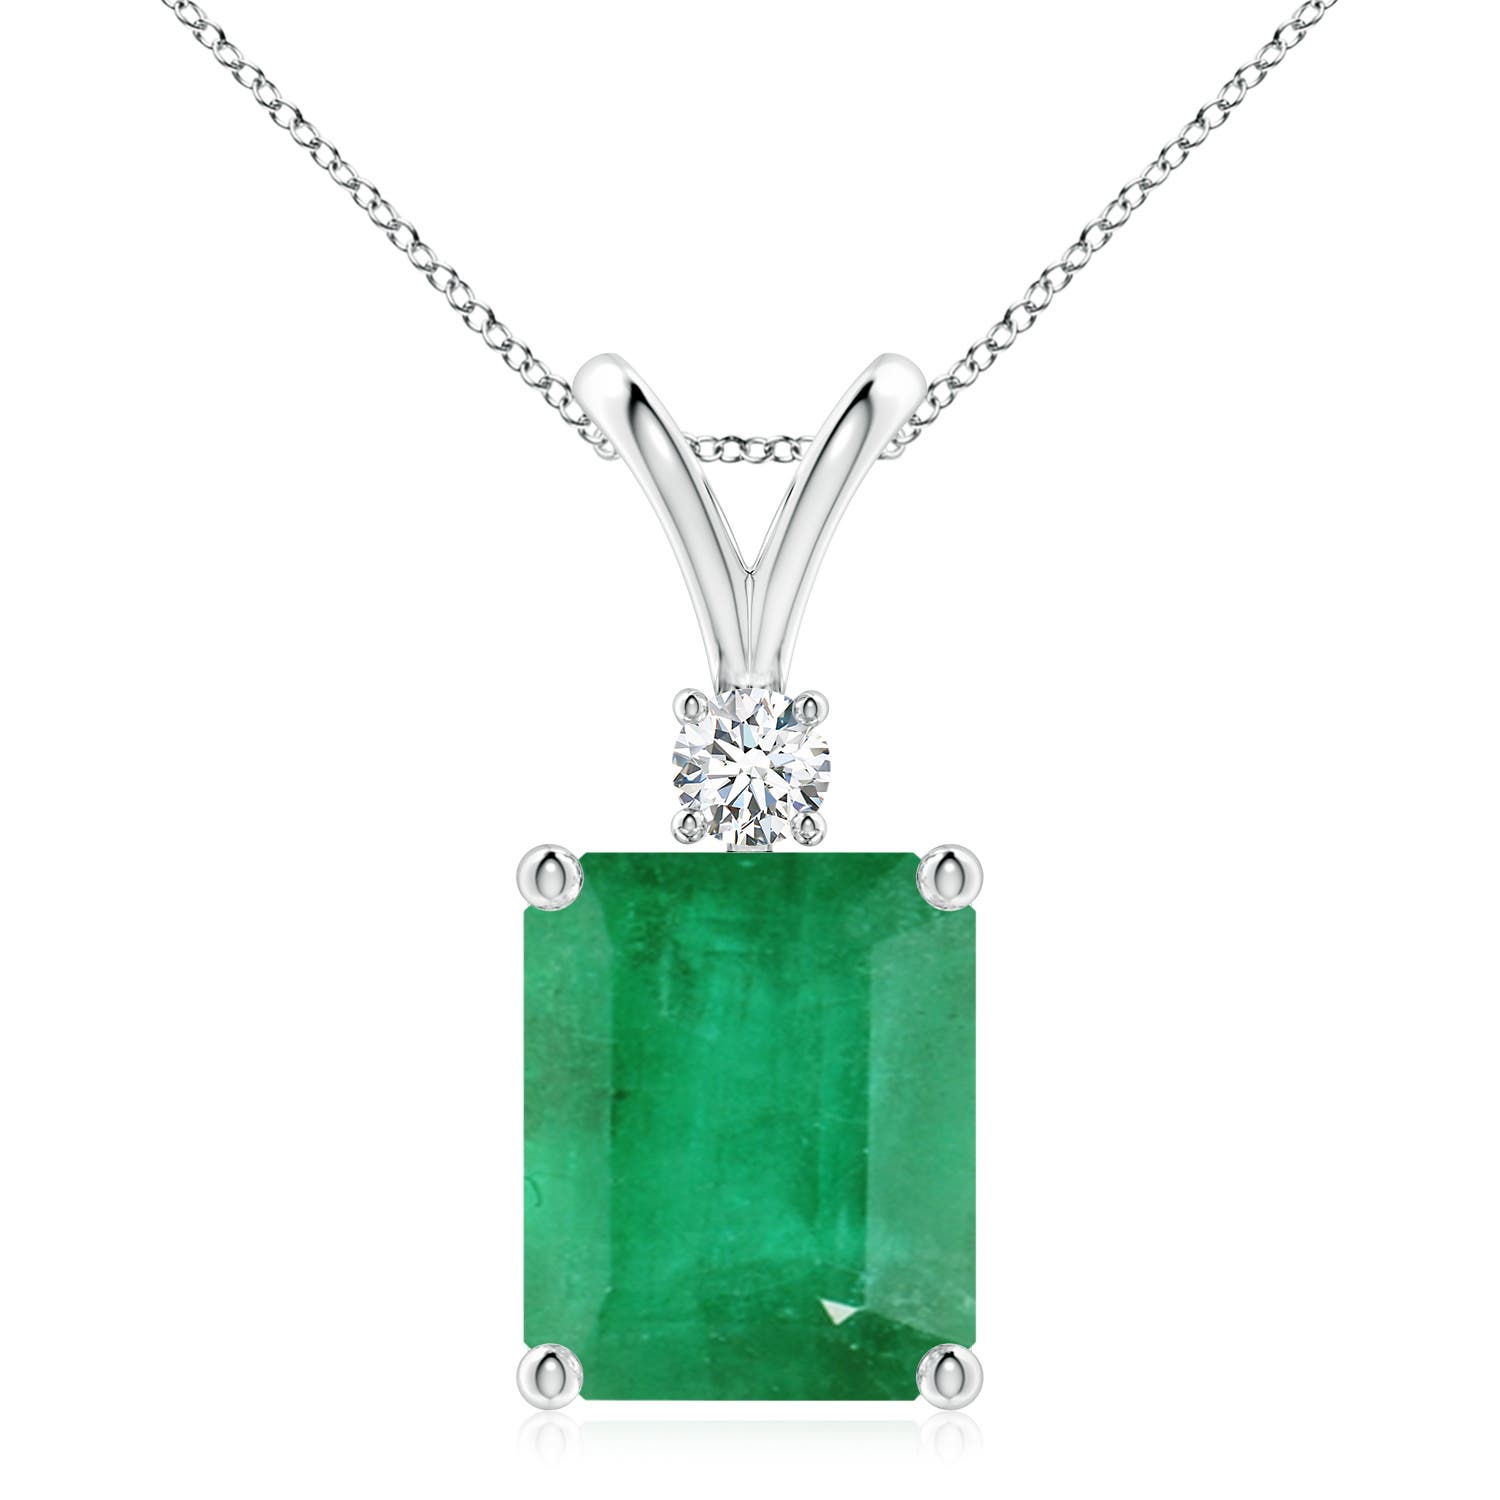 A - Emerald / 5.91 CT / 14 KT White Gold